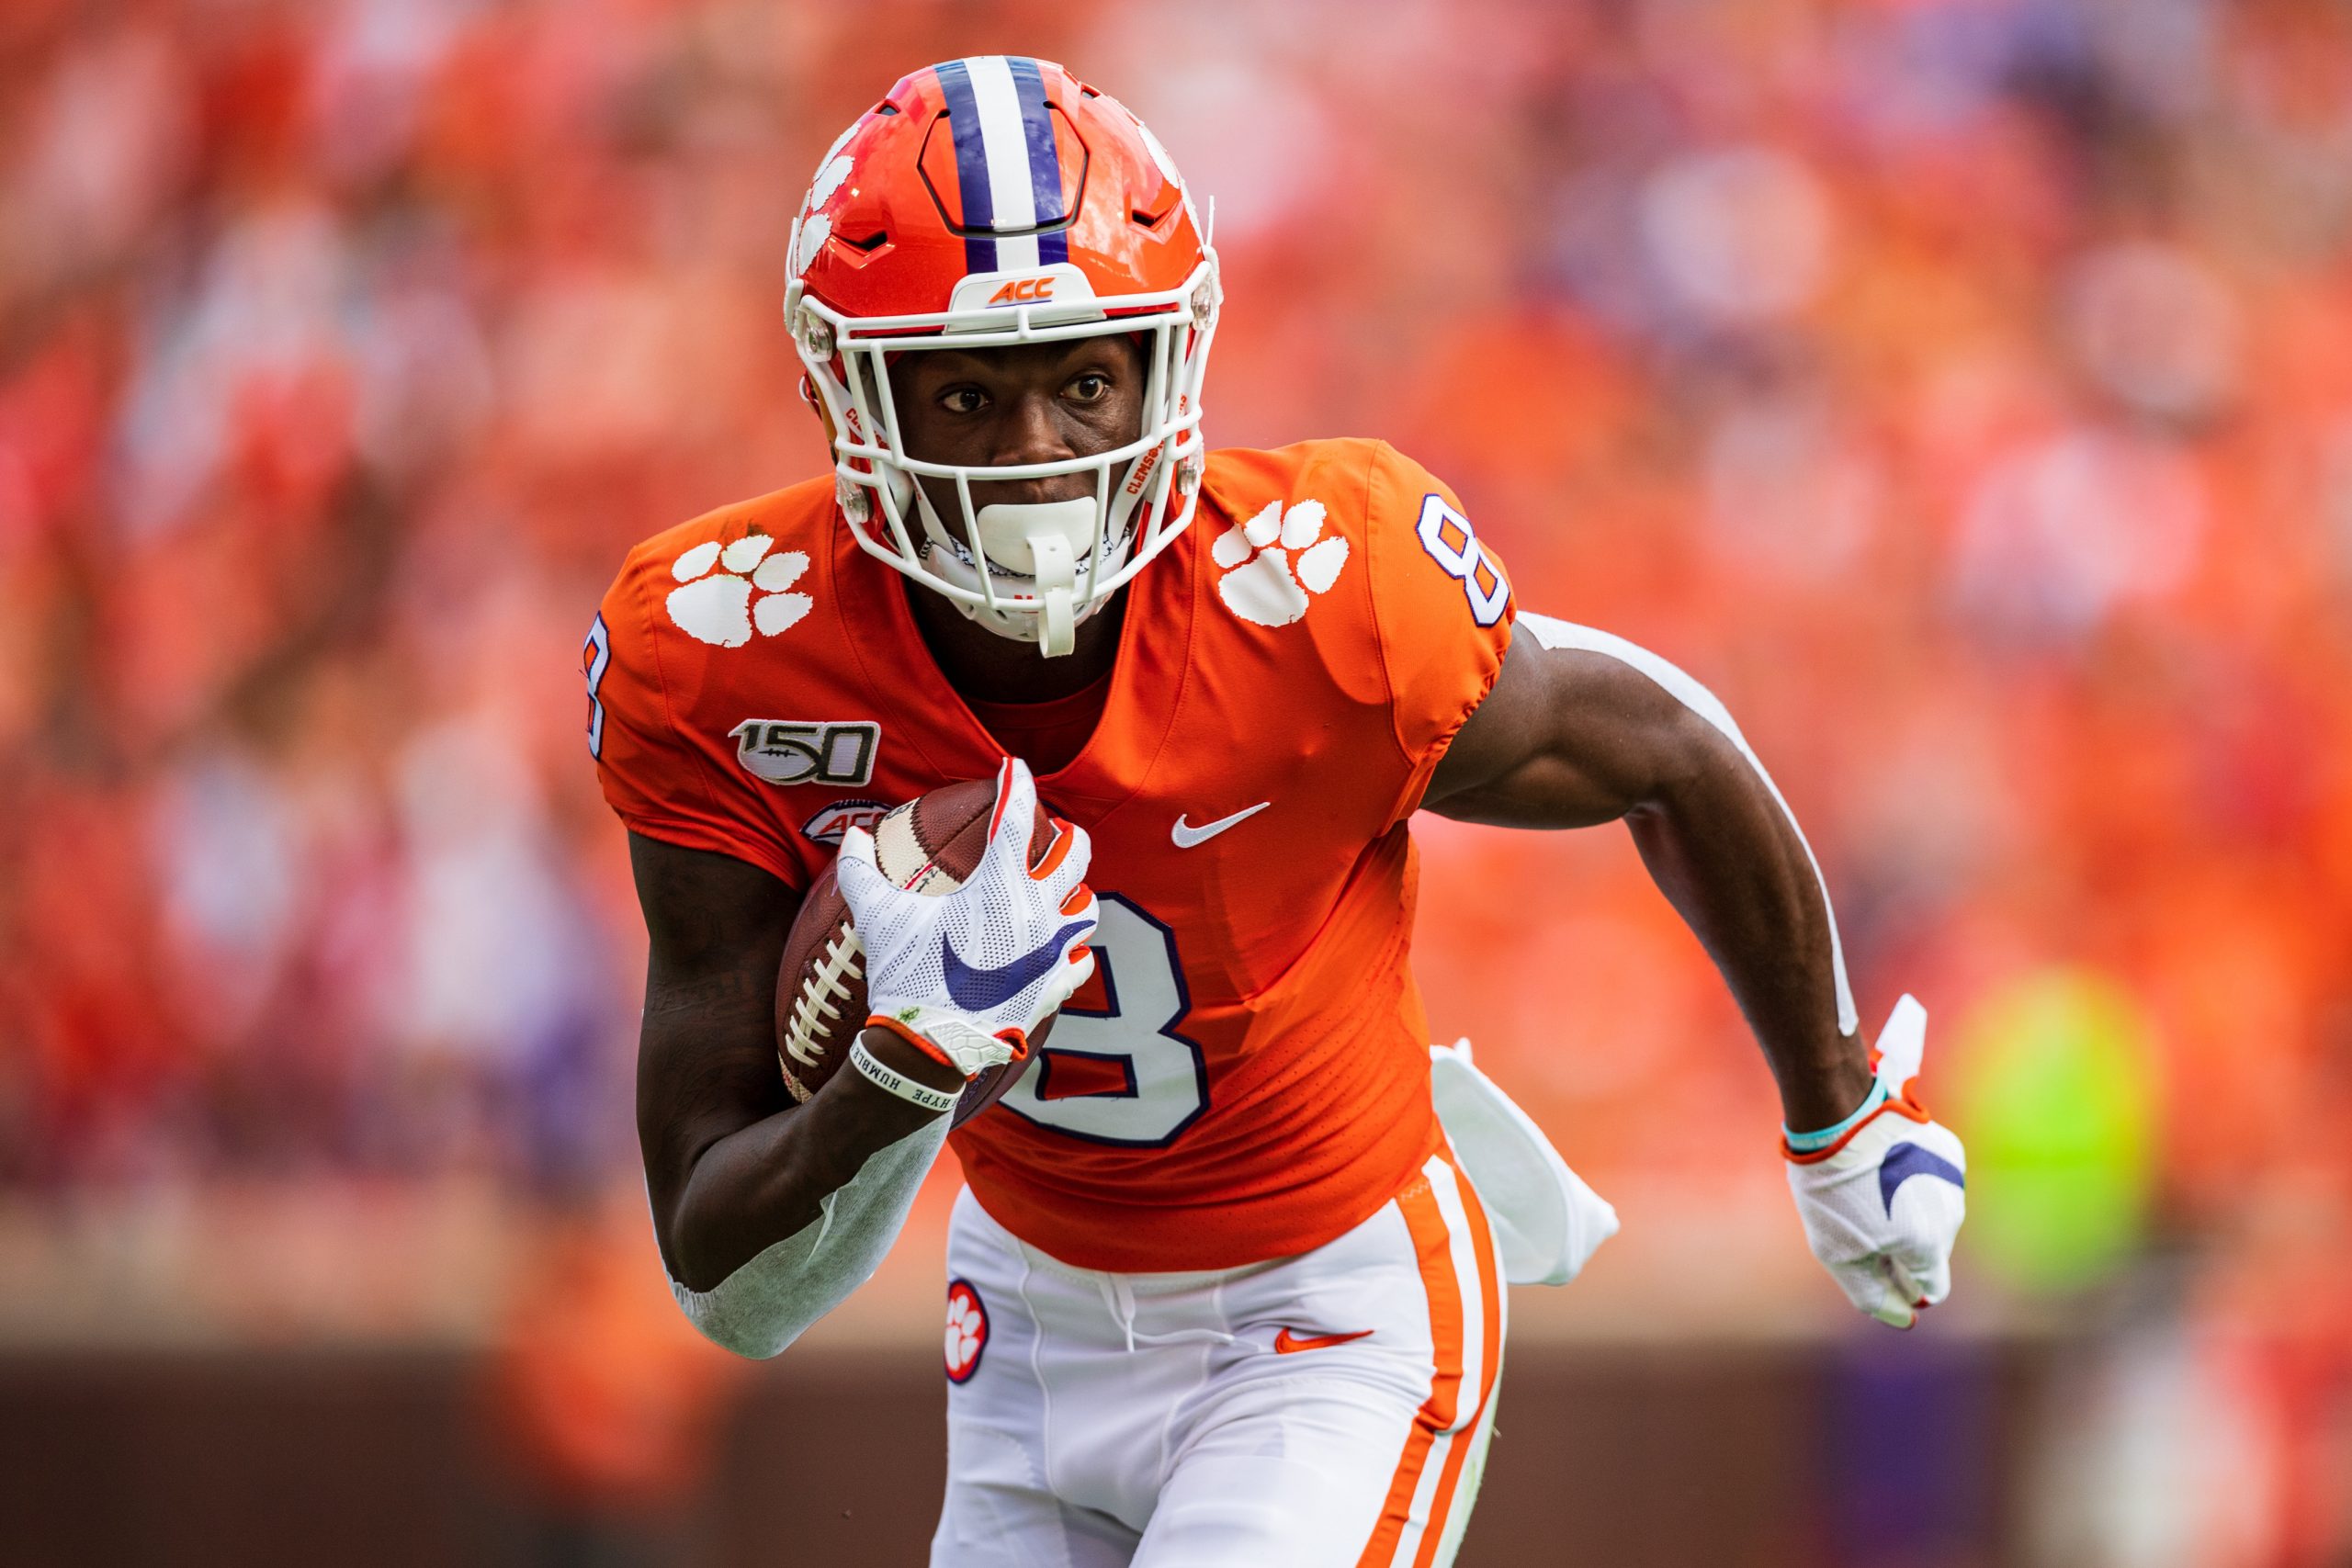 Clemson Tigers wide receiver Justyn Ross (8) during the NCAA, College League, USA college football game between Florida State University and Clemson on Saturday October 12, 2019 at Memorial Stadium in Clemson, SC. /CSM NCAA Football 2019: Florida State vs Clemson OCT 12 - ZUMAc04_ 20191012_zaf_c04_427 Copyright: xJacobxKupfermanx